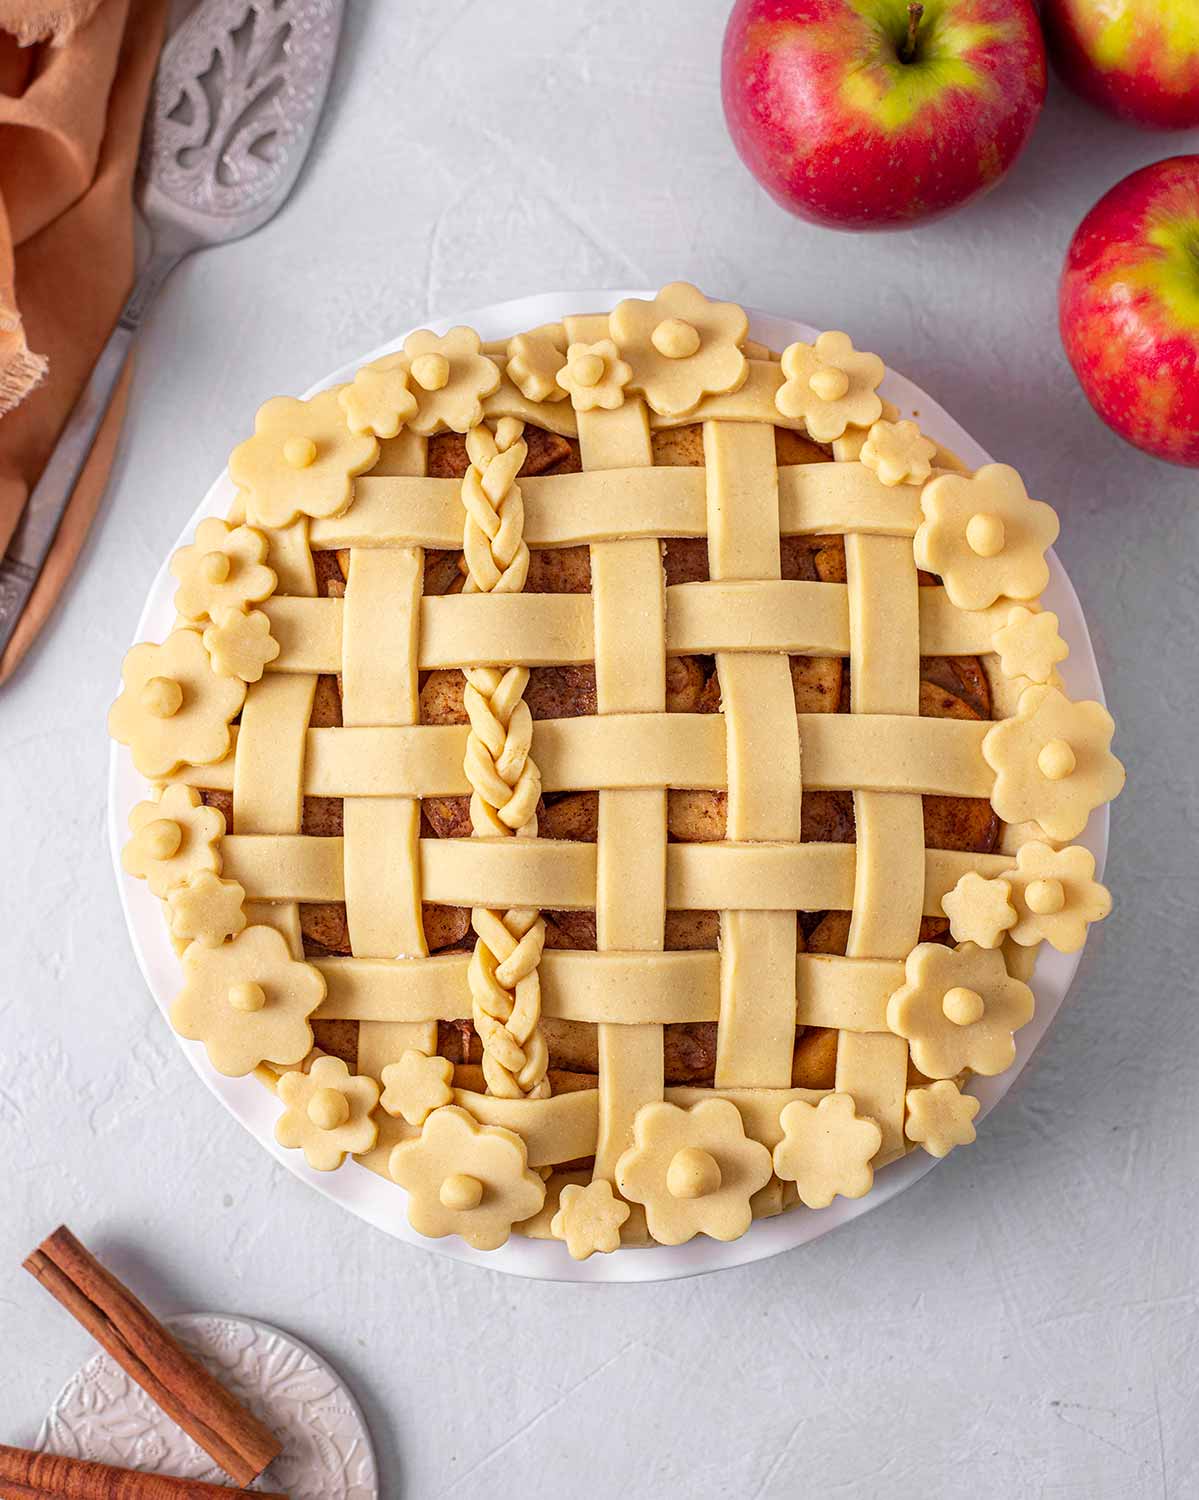 Unbaked apple pie surrounded by ingredients.